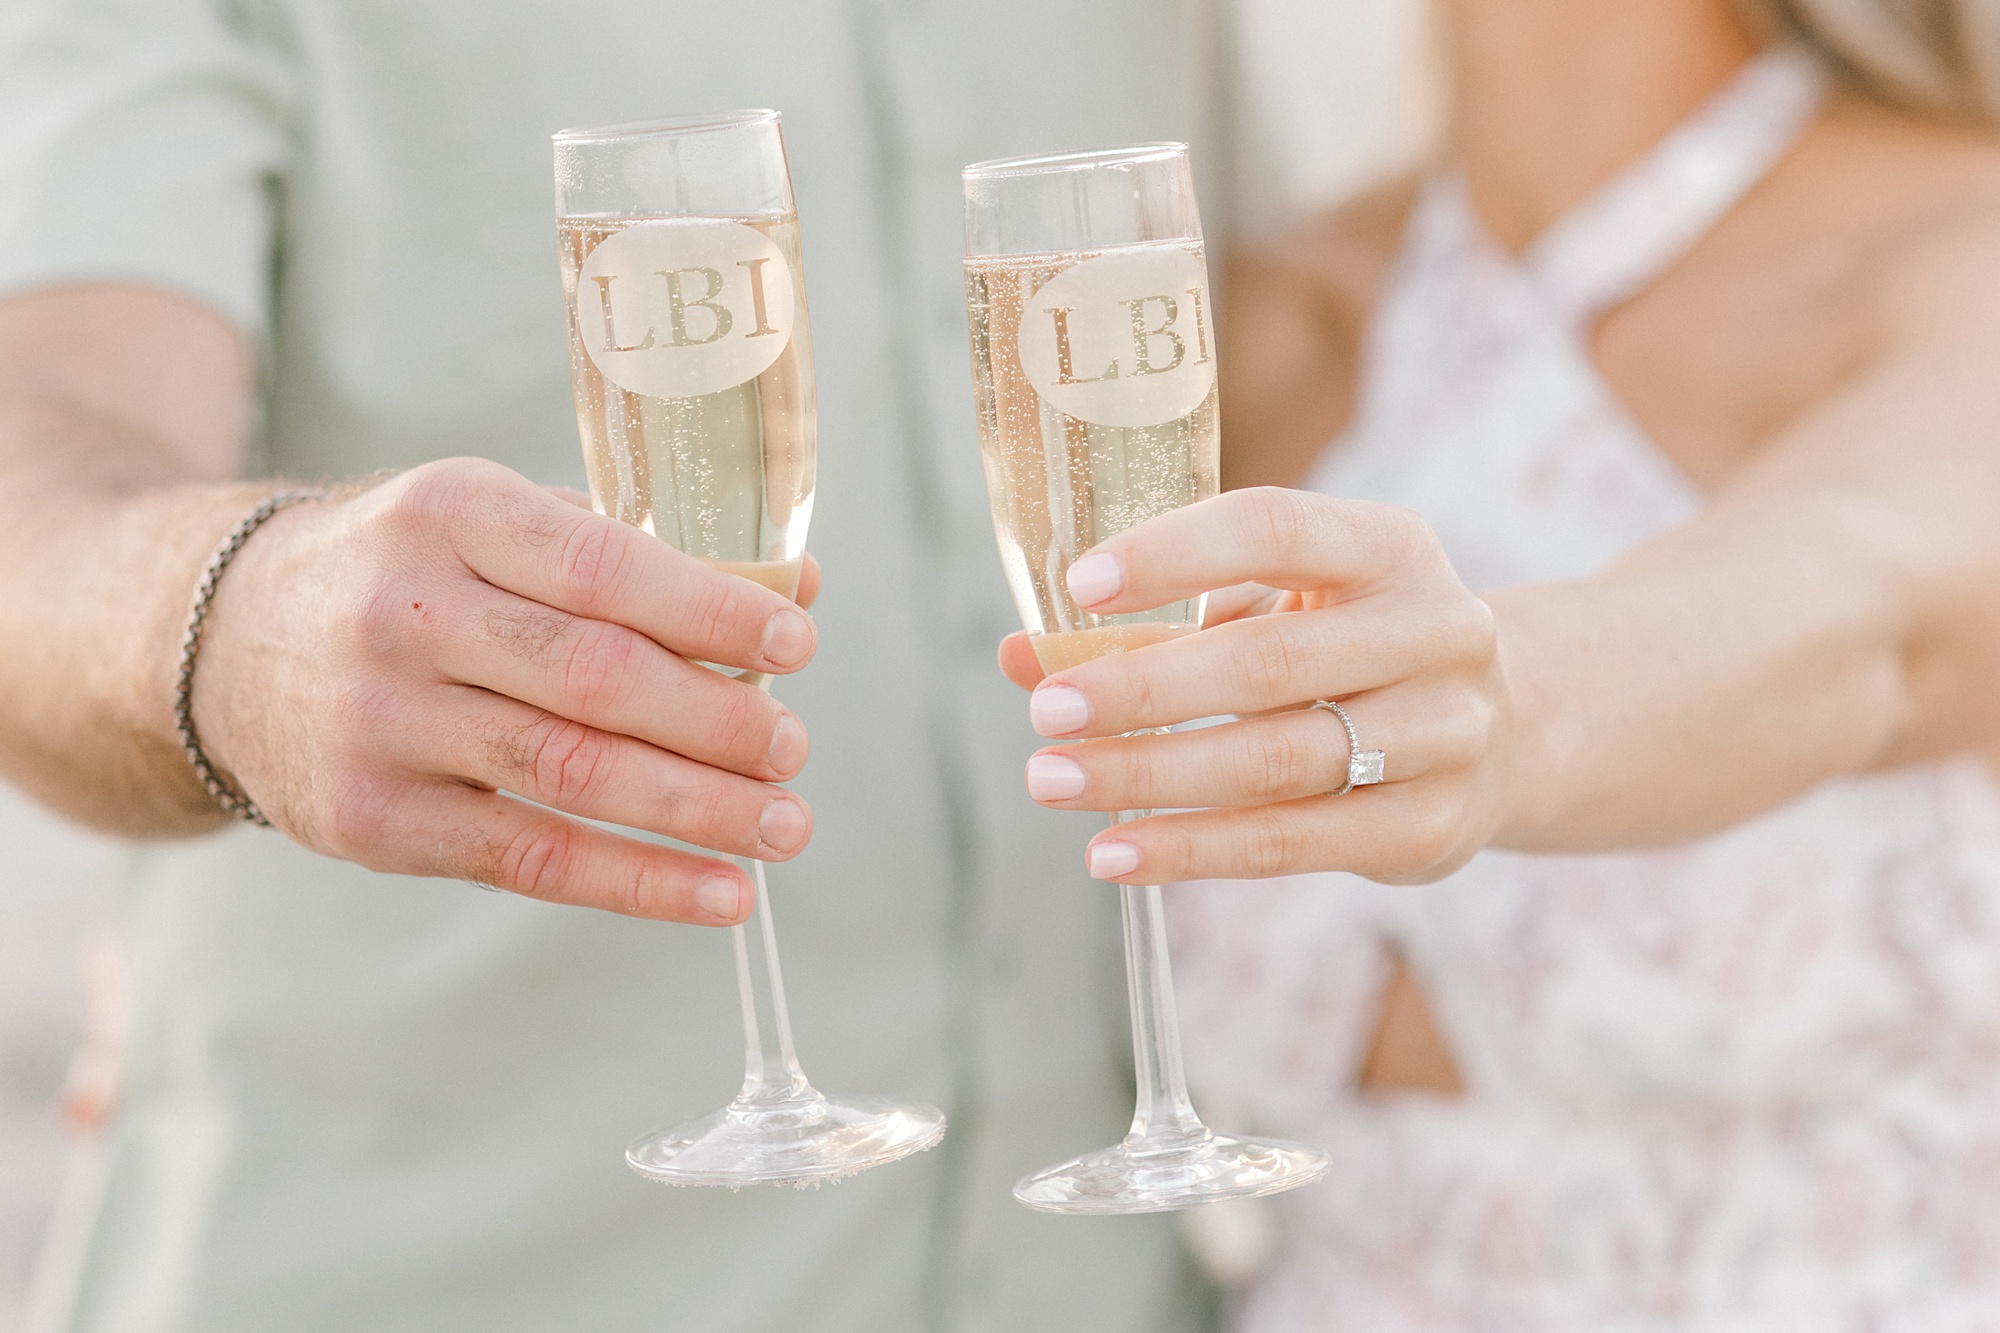 engaged couple holds LBI champagne glasses showing off bride's ring